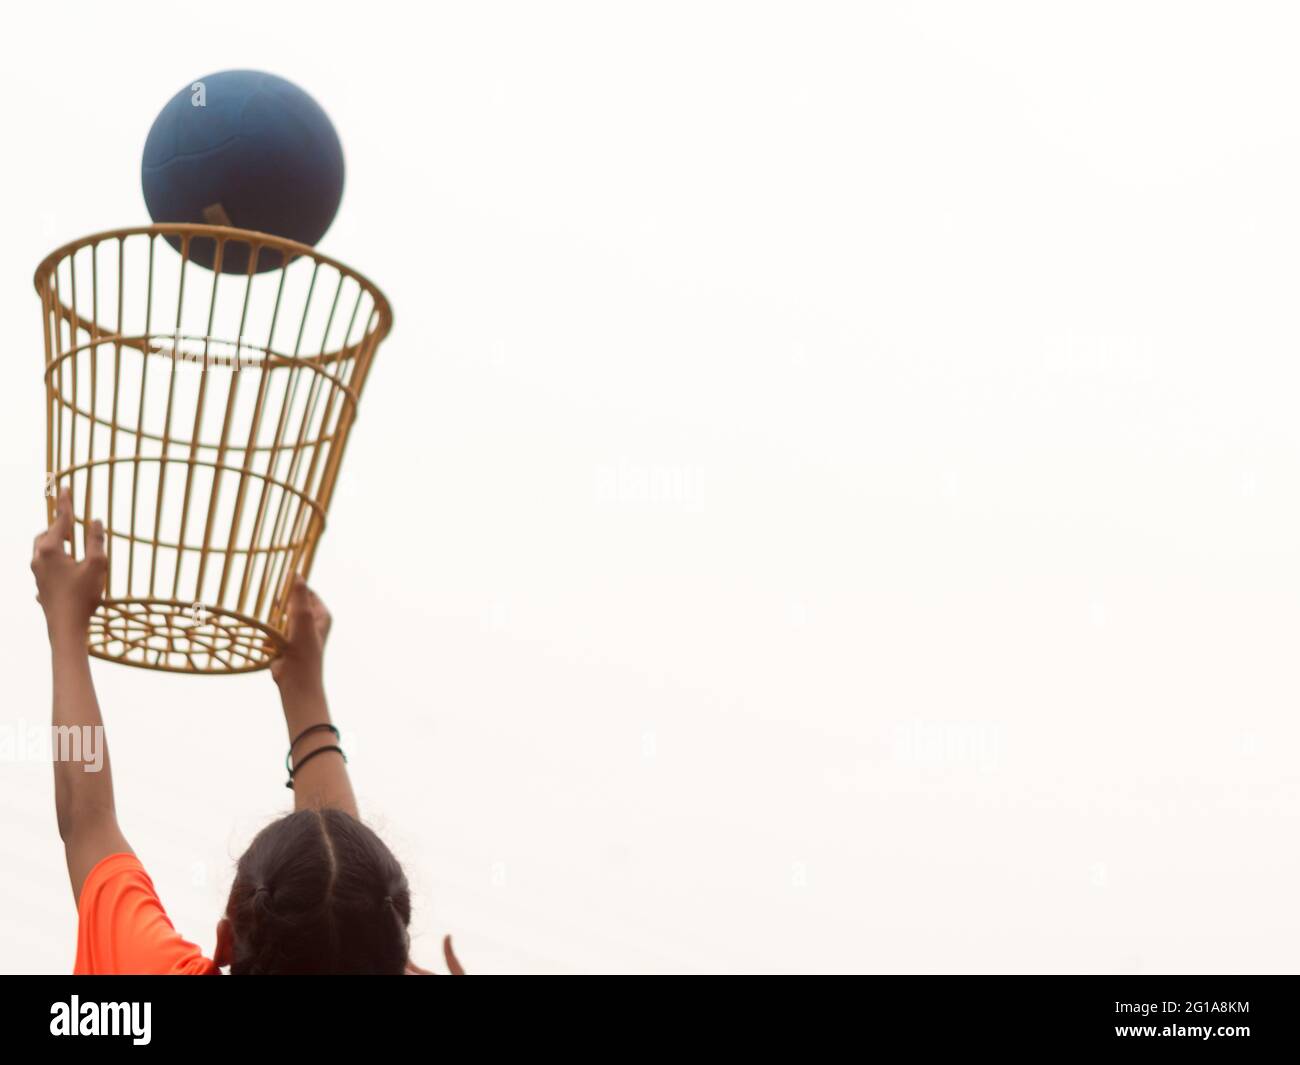 A girl in a basket holding position in a school chair-ball game Stock Photo